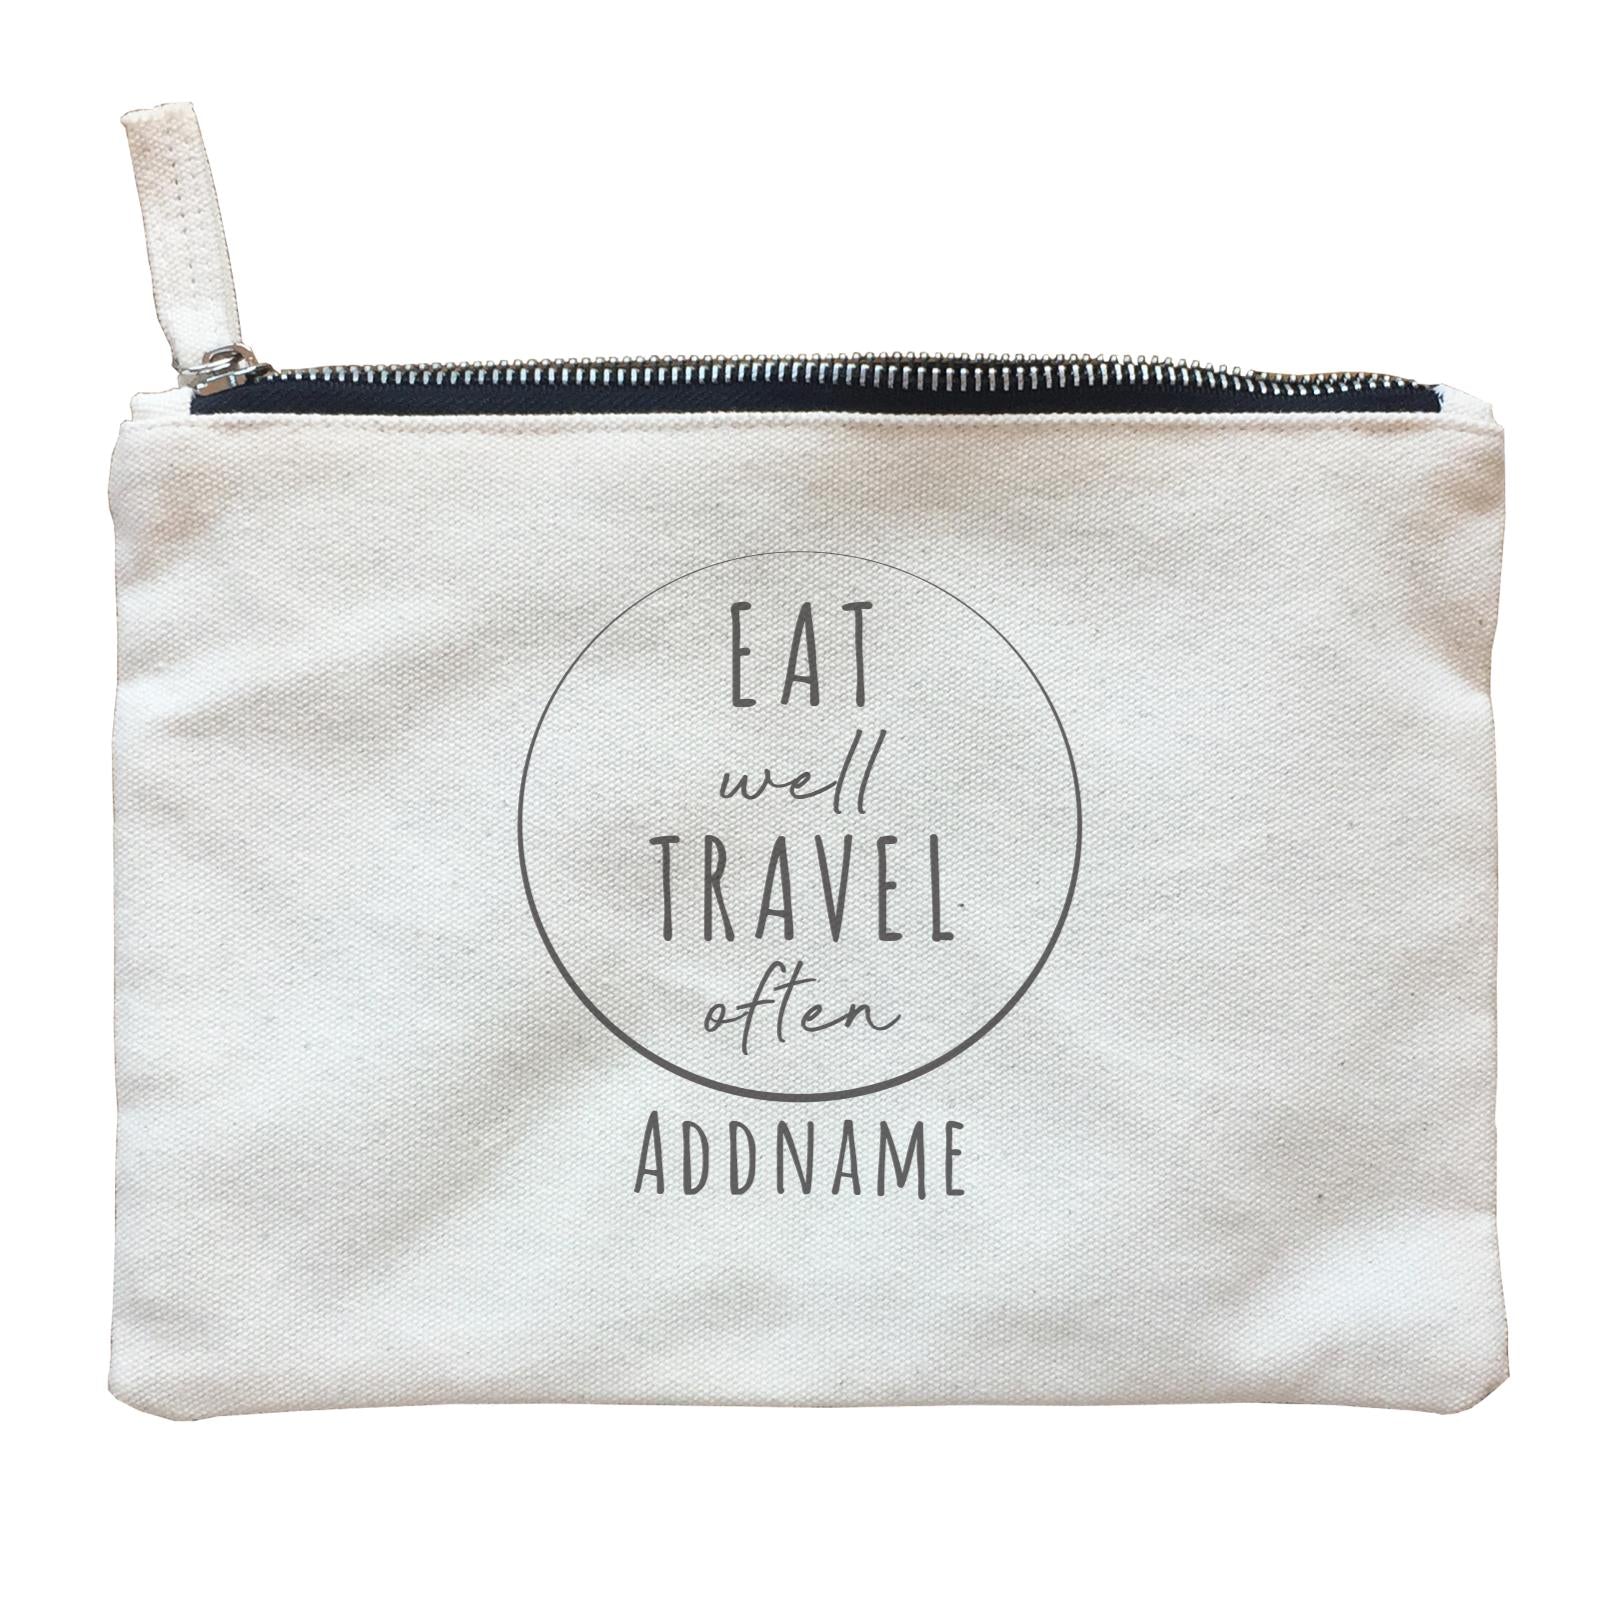 Travel Quotes Eat Well Travel Often Addname Zipper Pouch